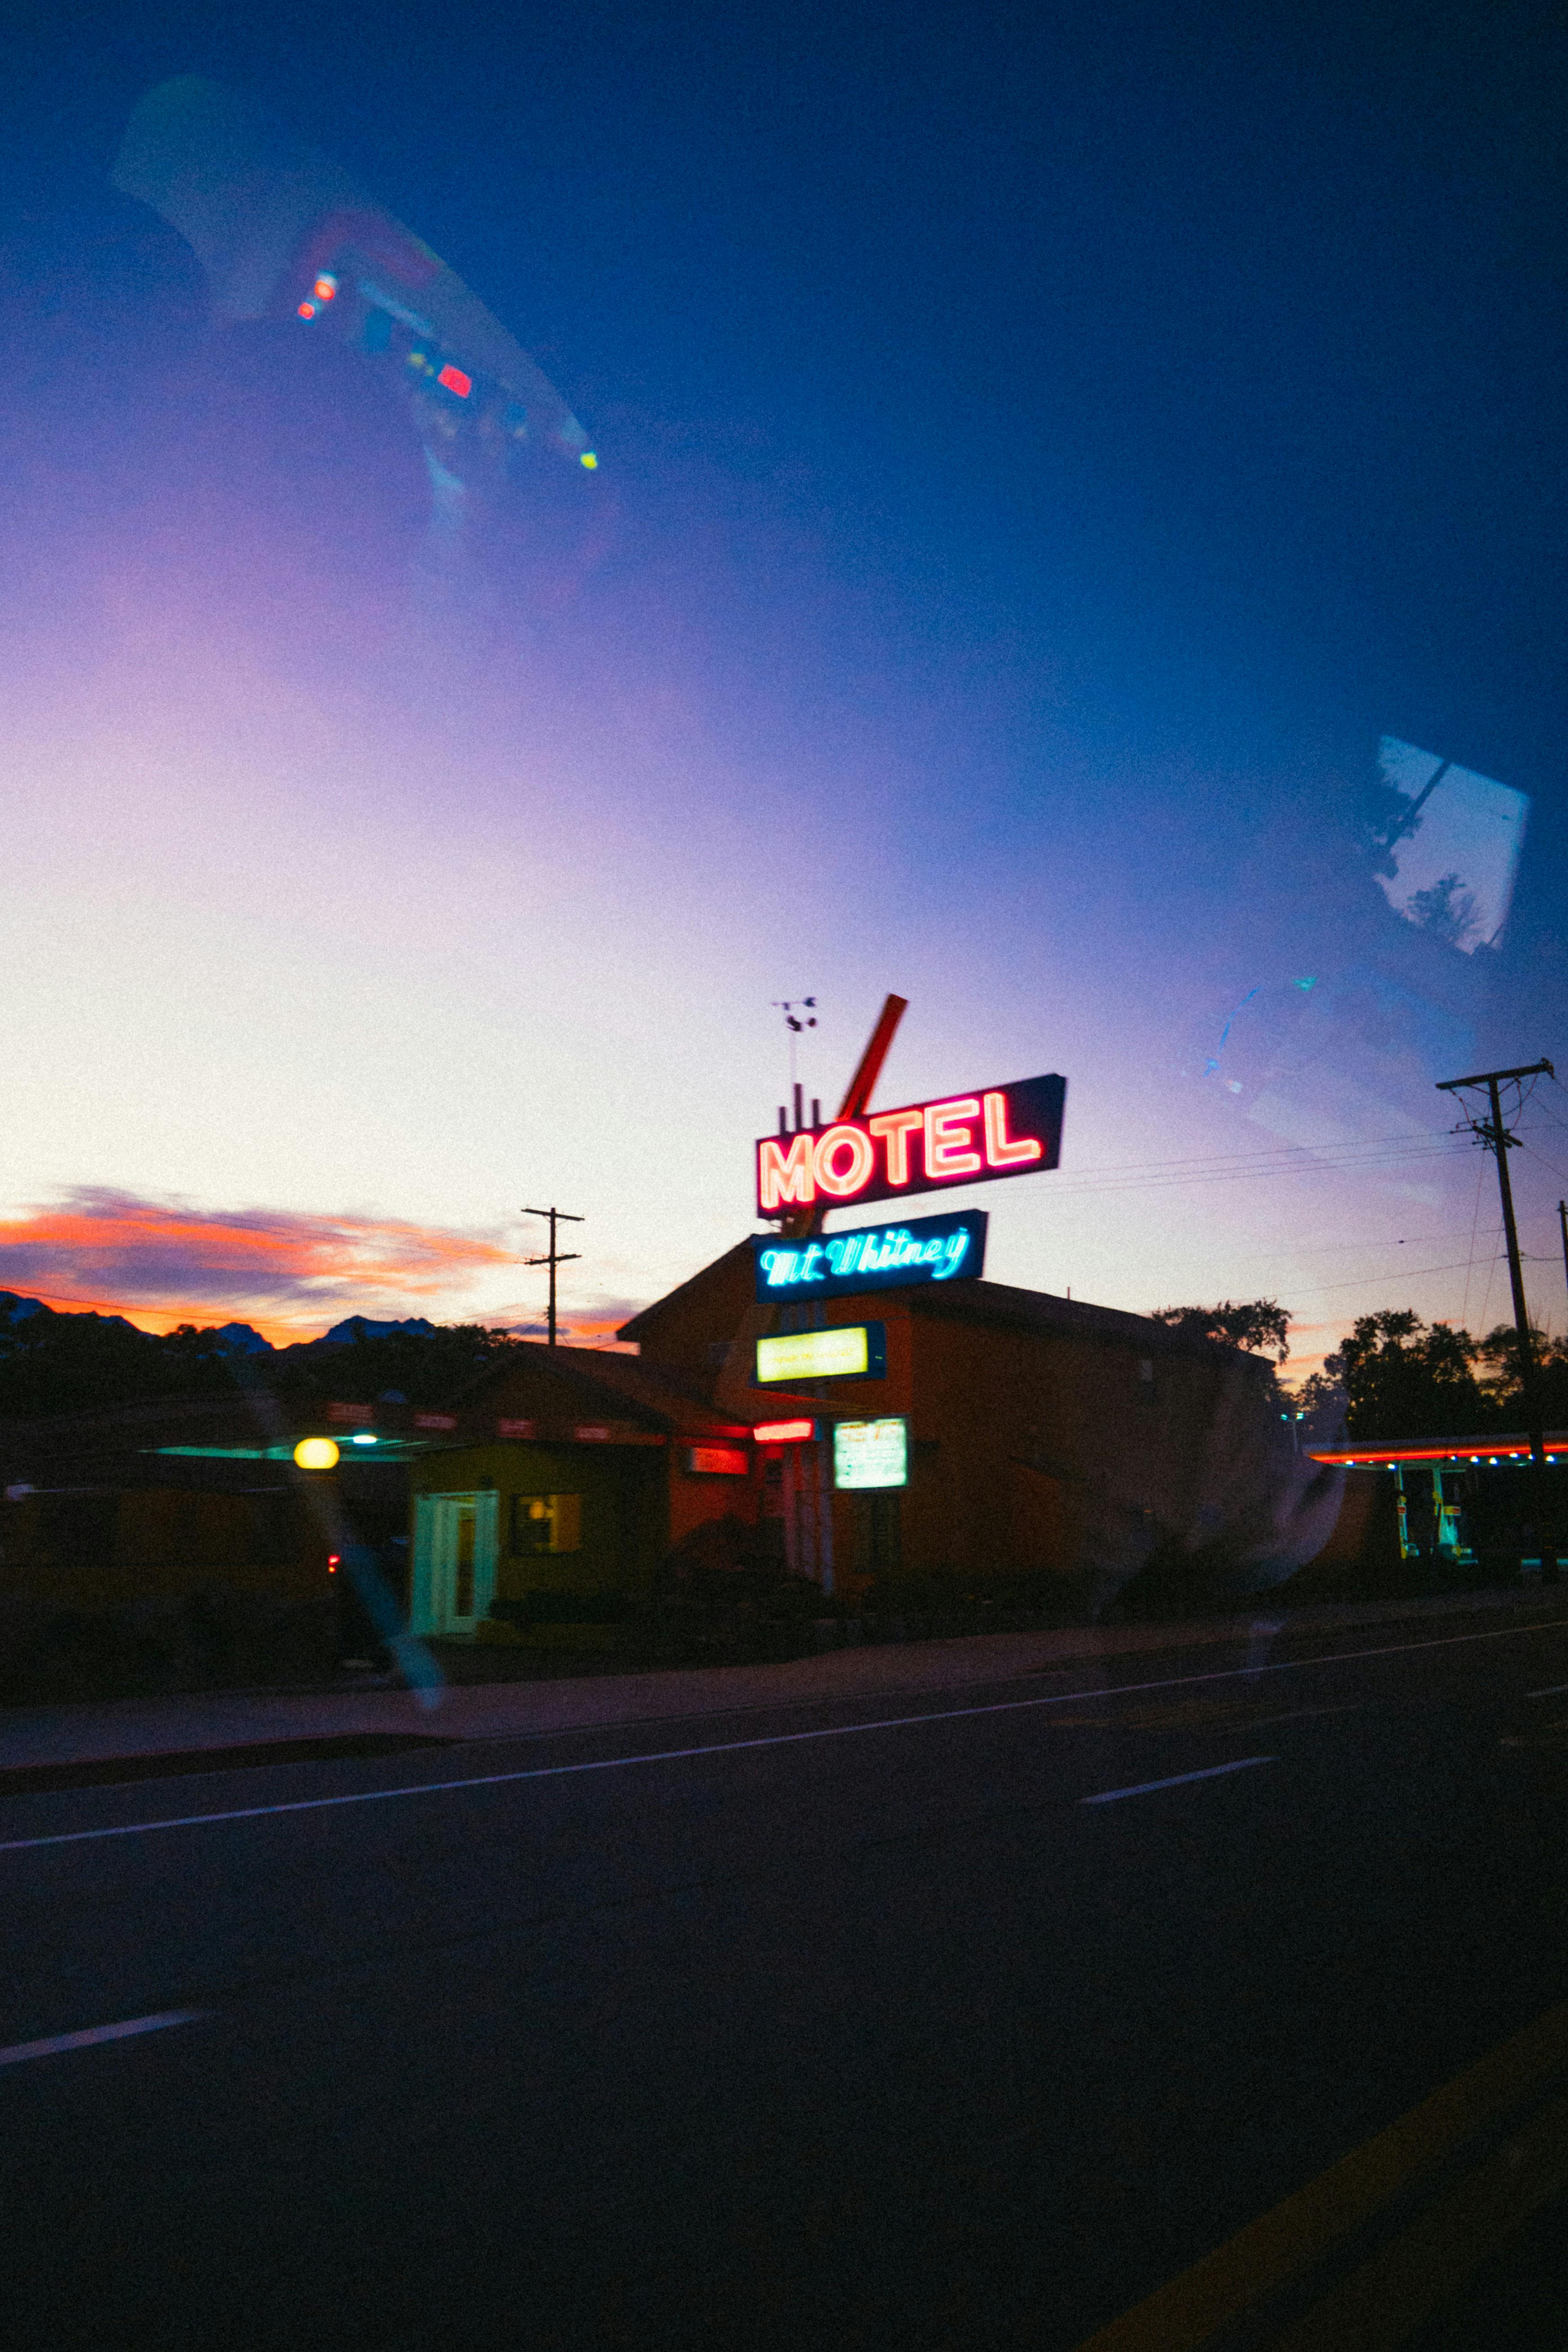 View of a motel. For illustration purposes only | Source: Pexels